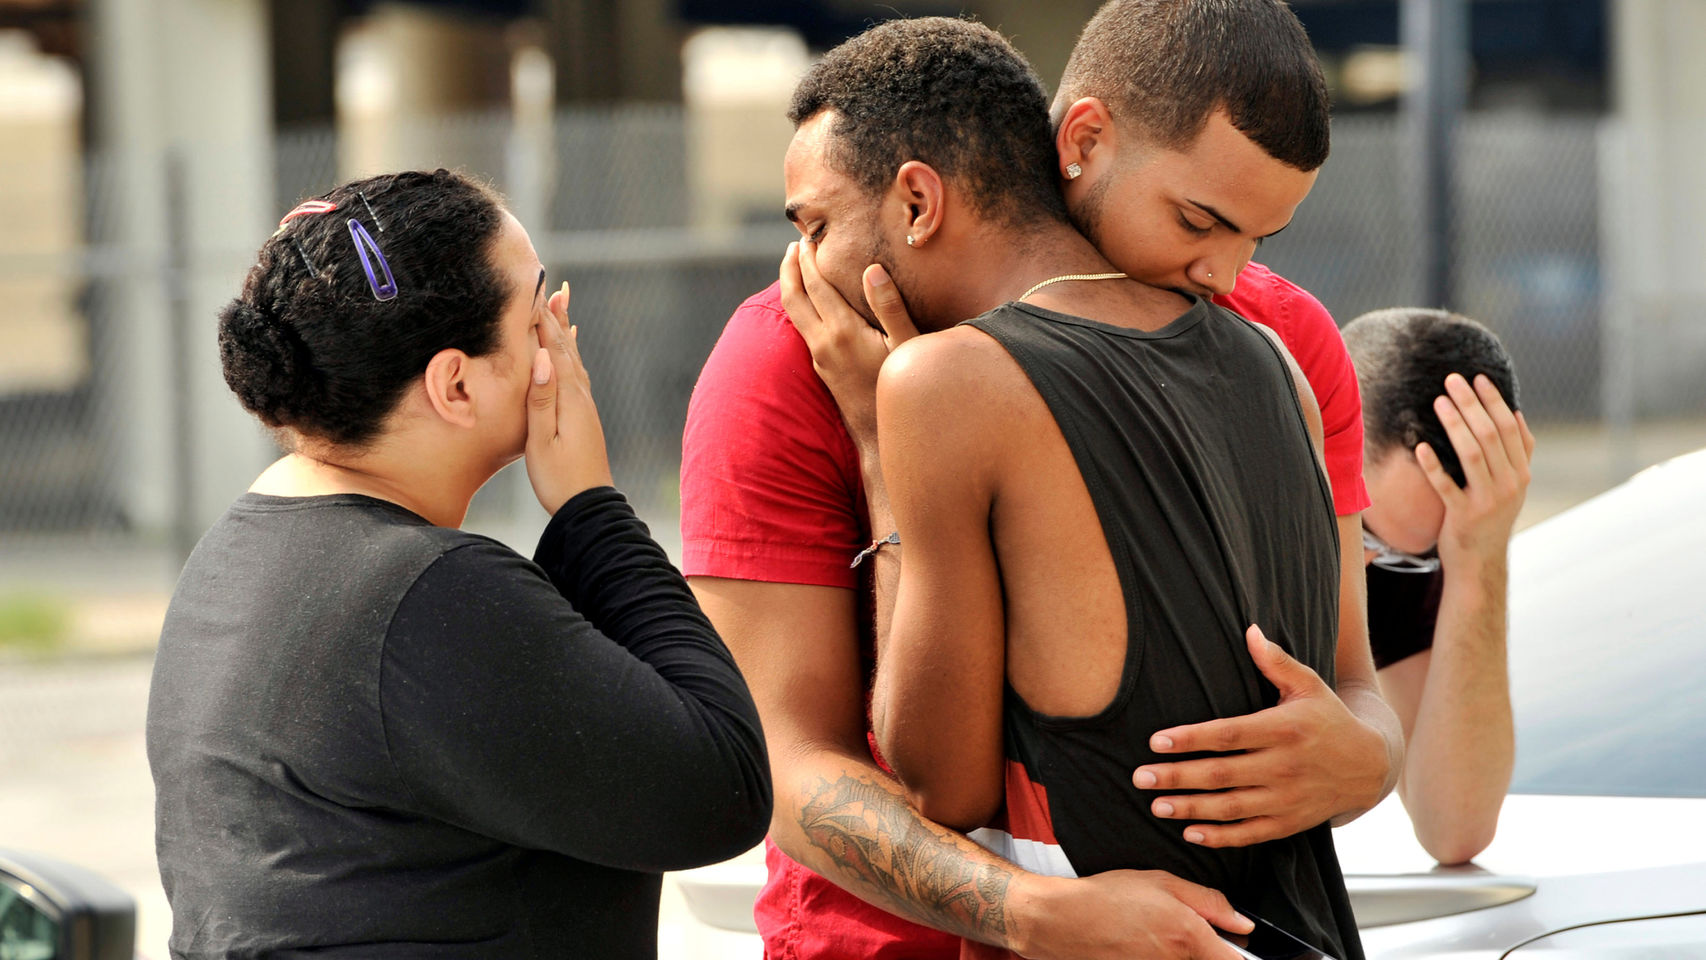 Pulse: The Orlando Shooting and the Intersection of Multiple Violences